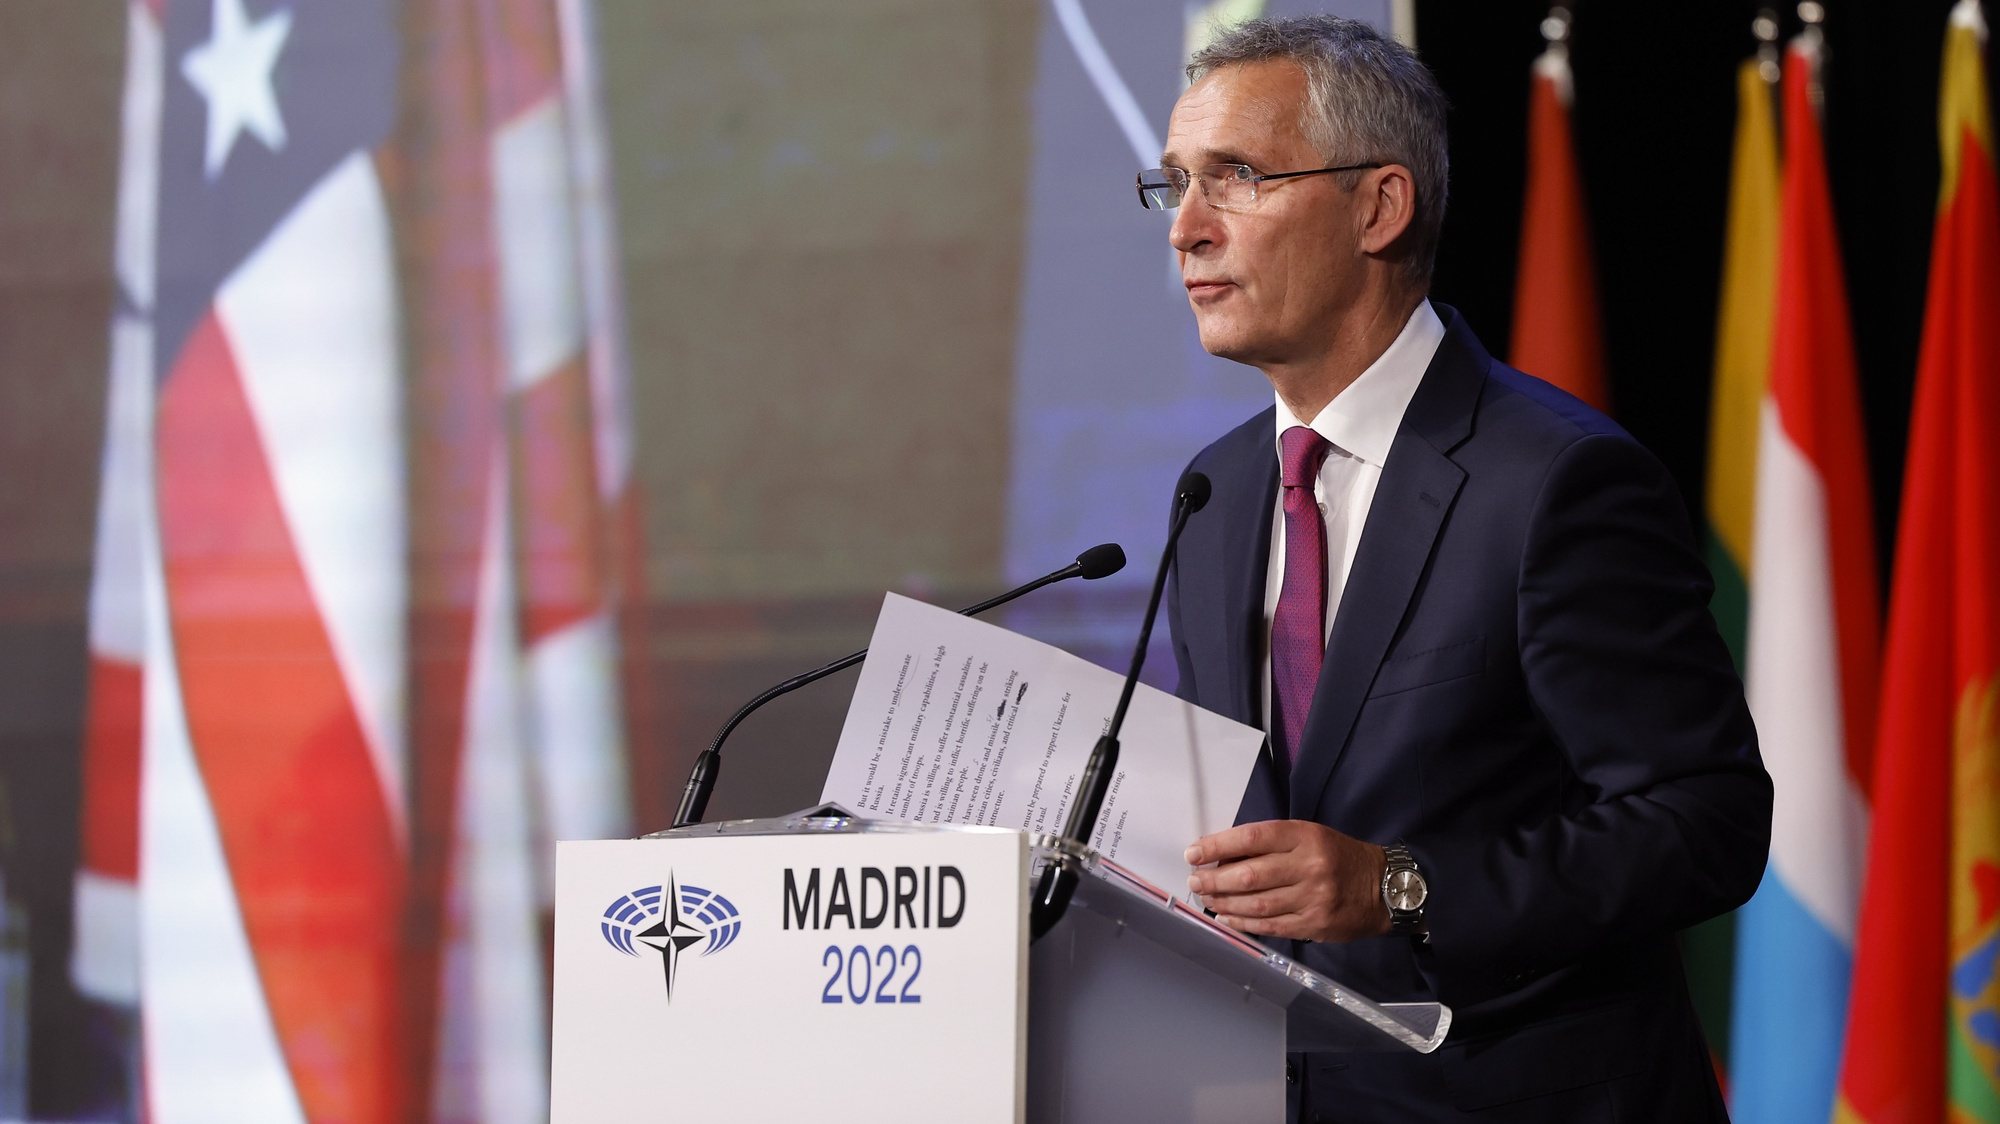 epa10317464 NATO Secretary General Jens Stoltenberg delivers a speech during the 68th NATO Parliamentary Assembly in Madrid, Spain, 21 November 2022. NATO Parliamentary Assemblys Annual Session runs in Spains capital from 18 to 21 November 2022, with the participation, by telematic means, the President of Ukraine, Volodymyr Zelensky.  EPA/CHEMA MOYA